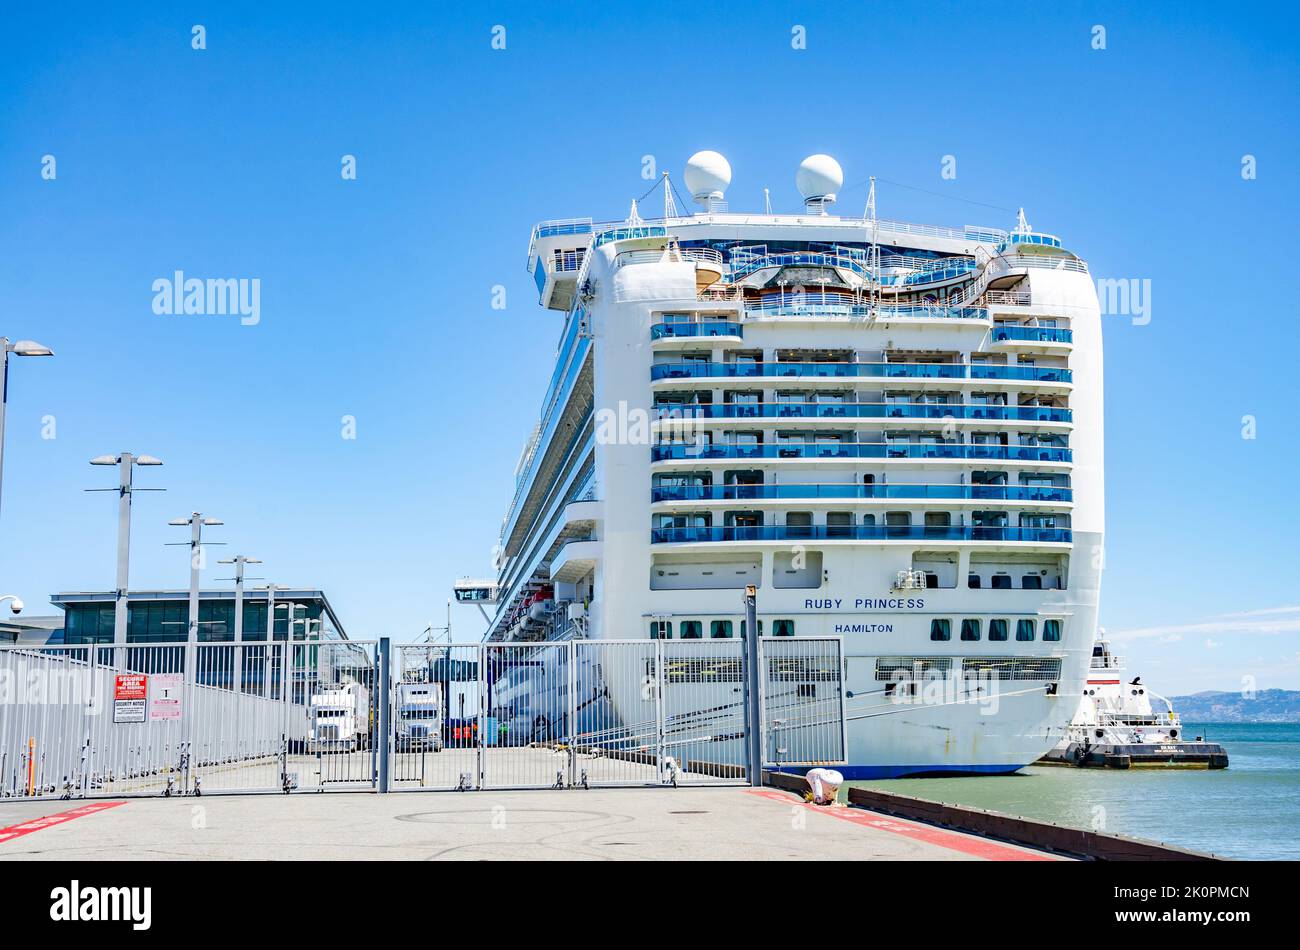 Ruby Princess, a massive cruise liner docked at The James R Herman Cruise Terminal at Pier 27 in The Port of San Francisco, California, USA Stock Photo